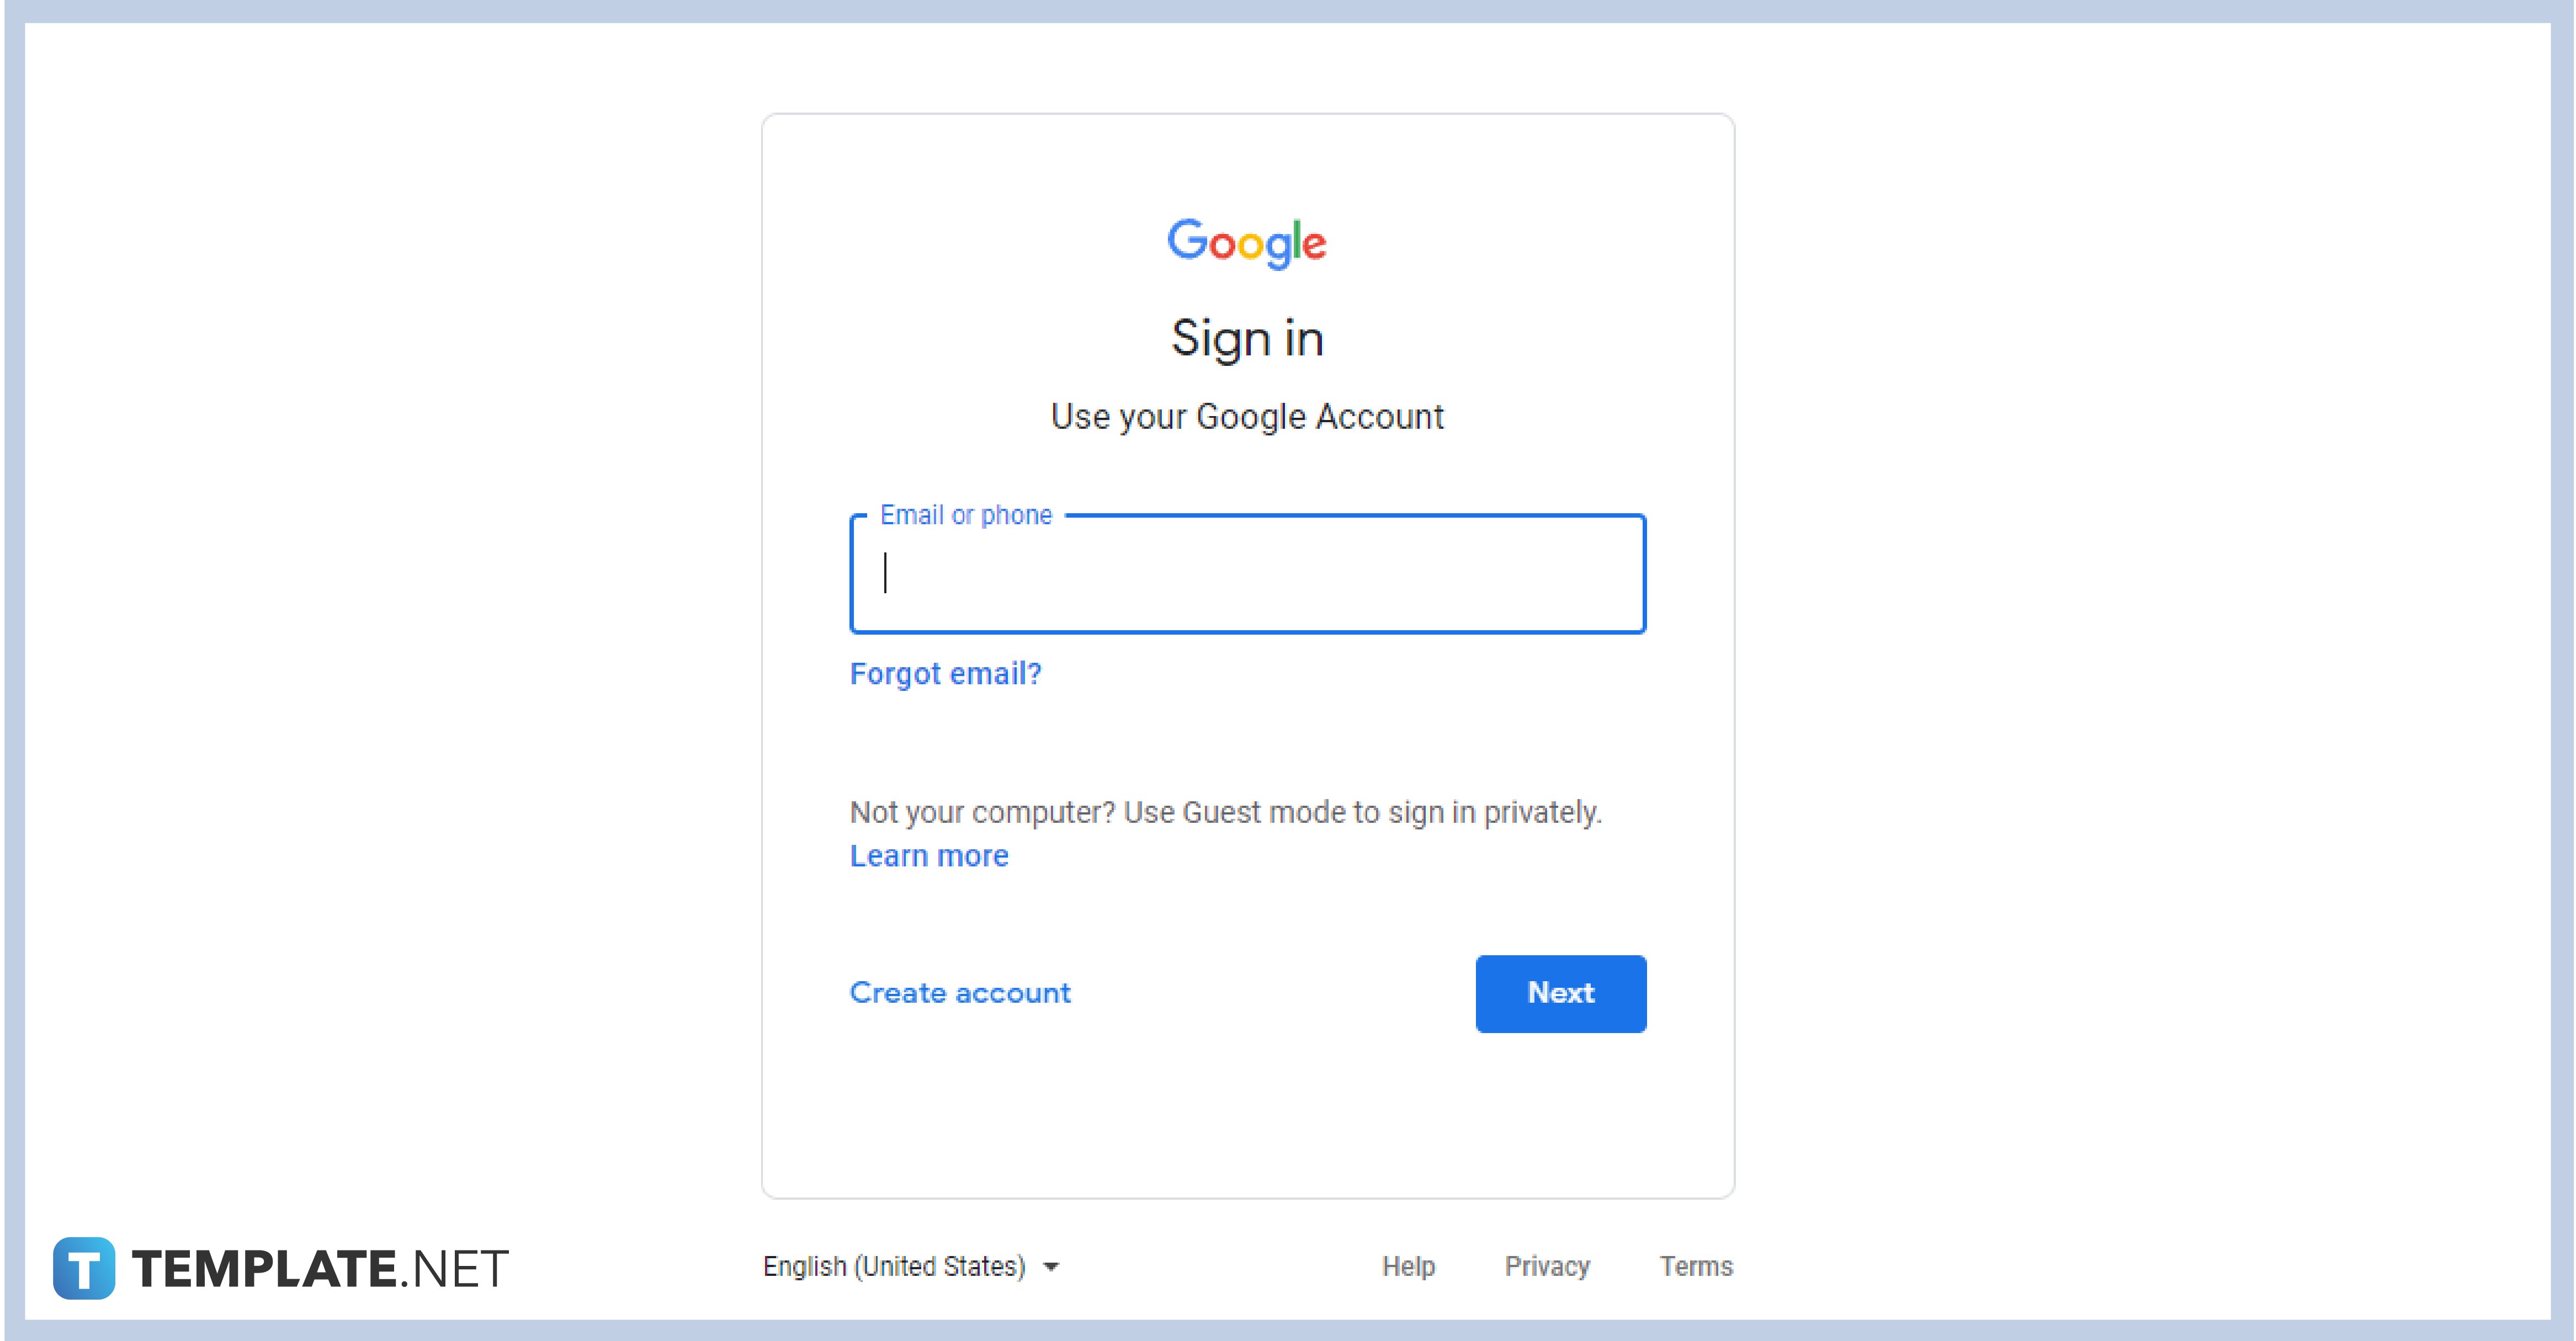 step-1-sign-in-with-your-account-0113